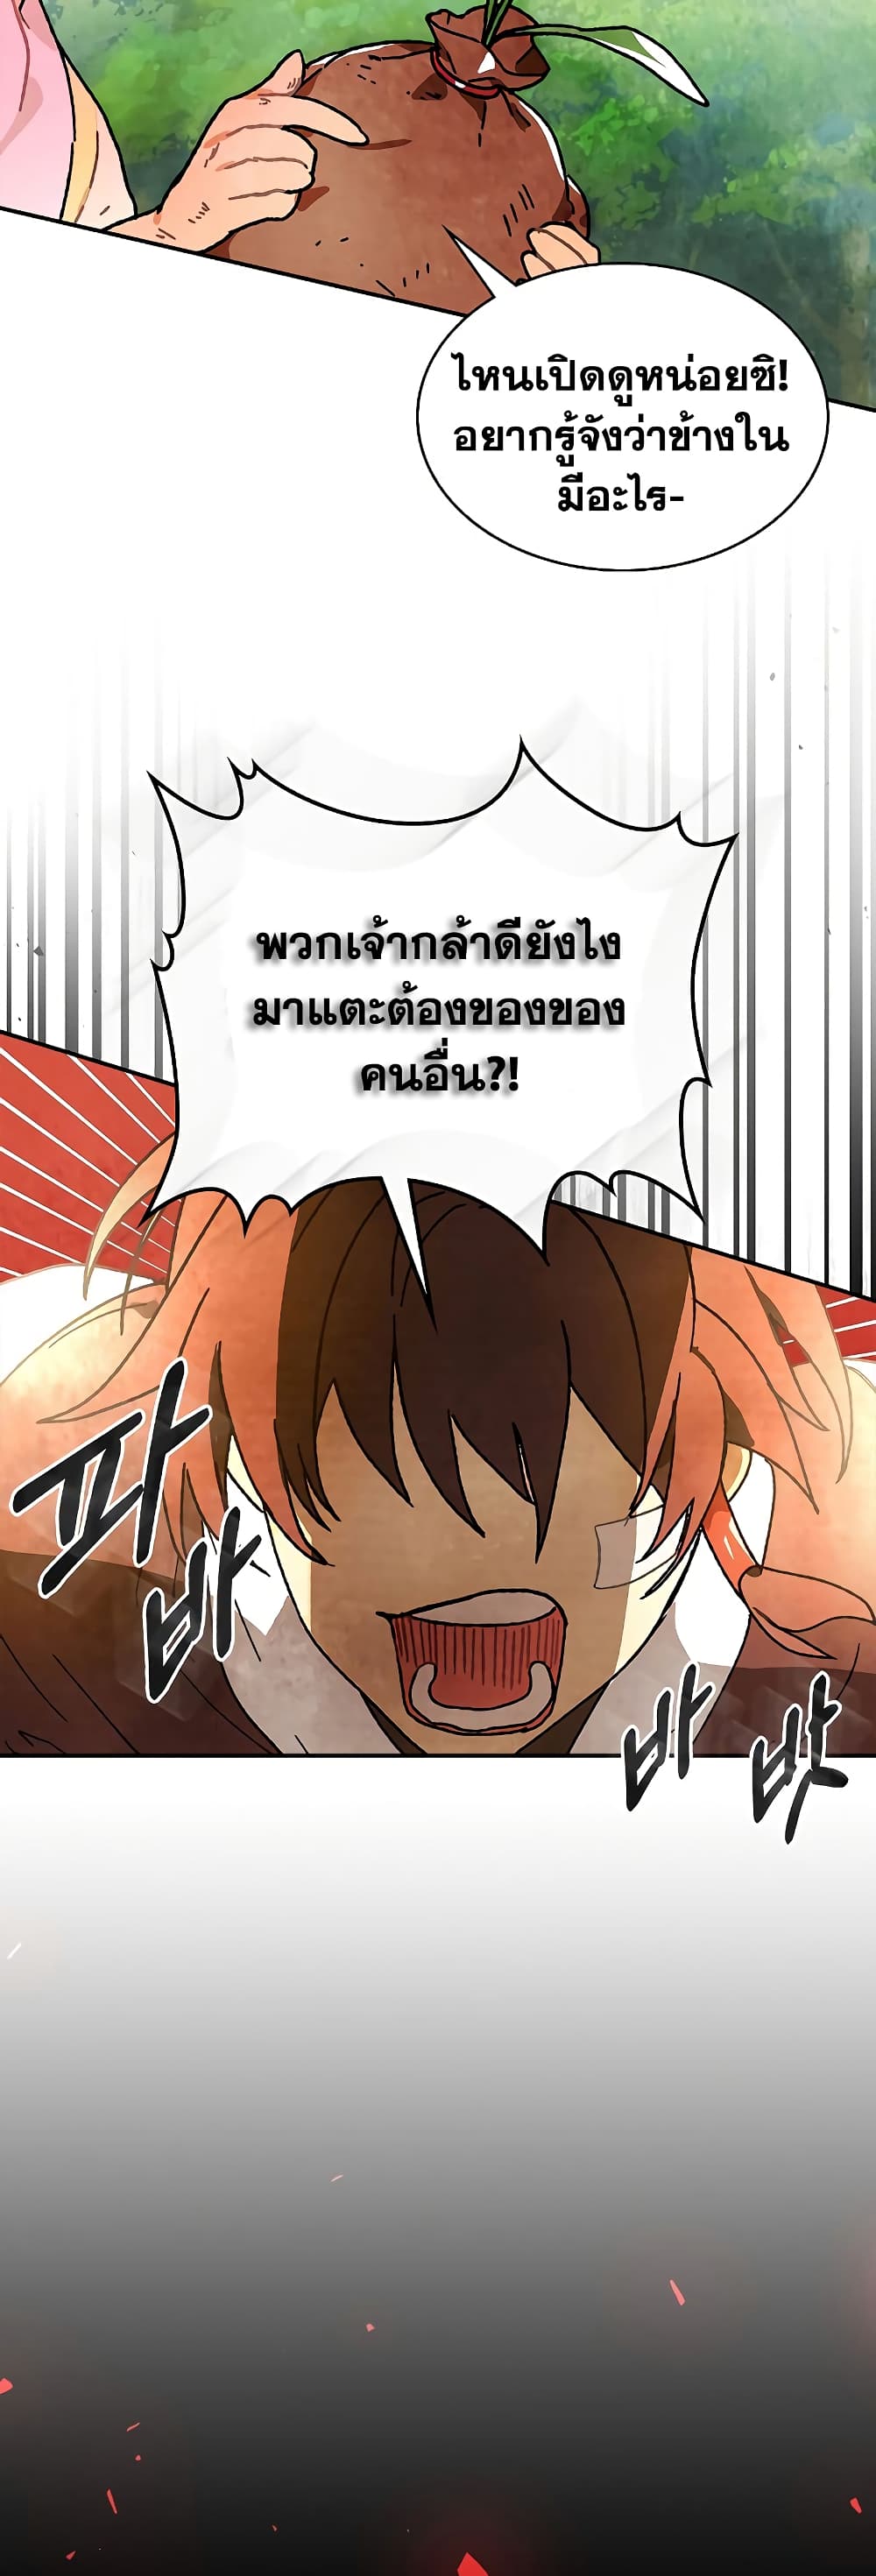 Chronicles Of The Martial God’s Return ตอนที่ 7 (18)